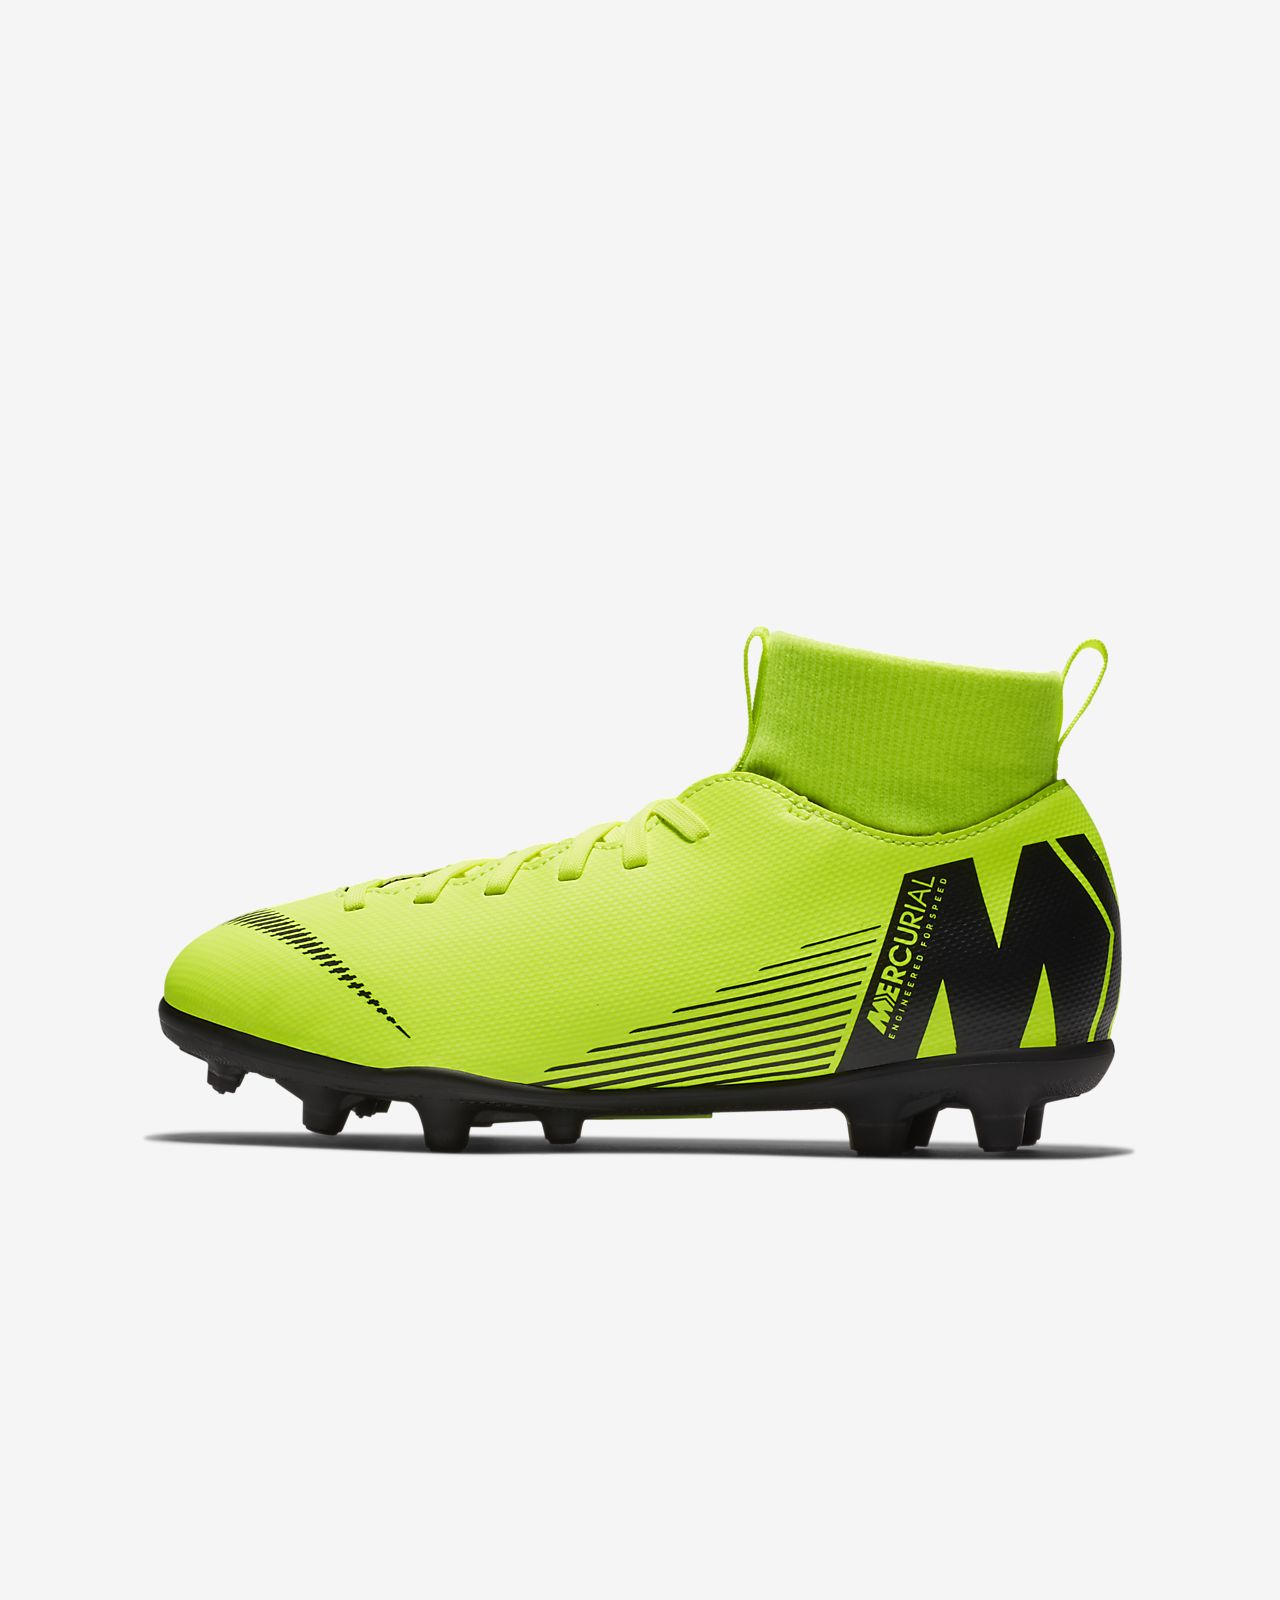 Nike Mercurial Superfly 5 (Motion Blur Pack) One YouTube